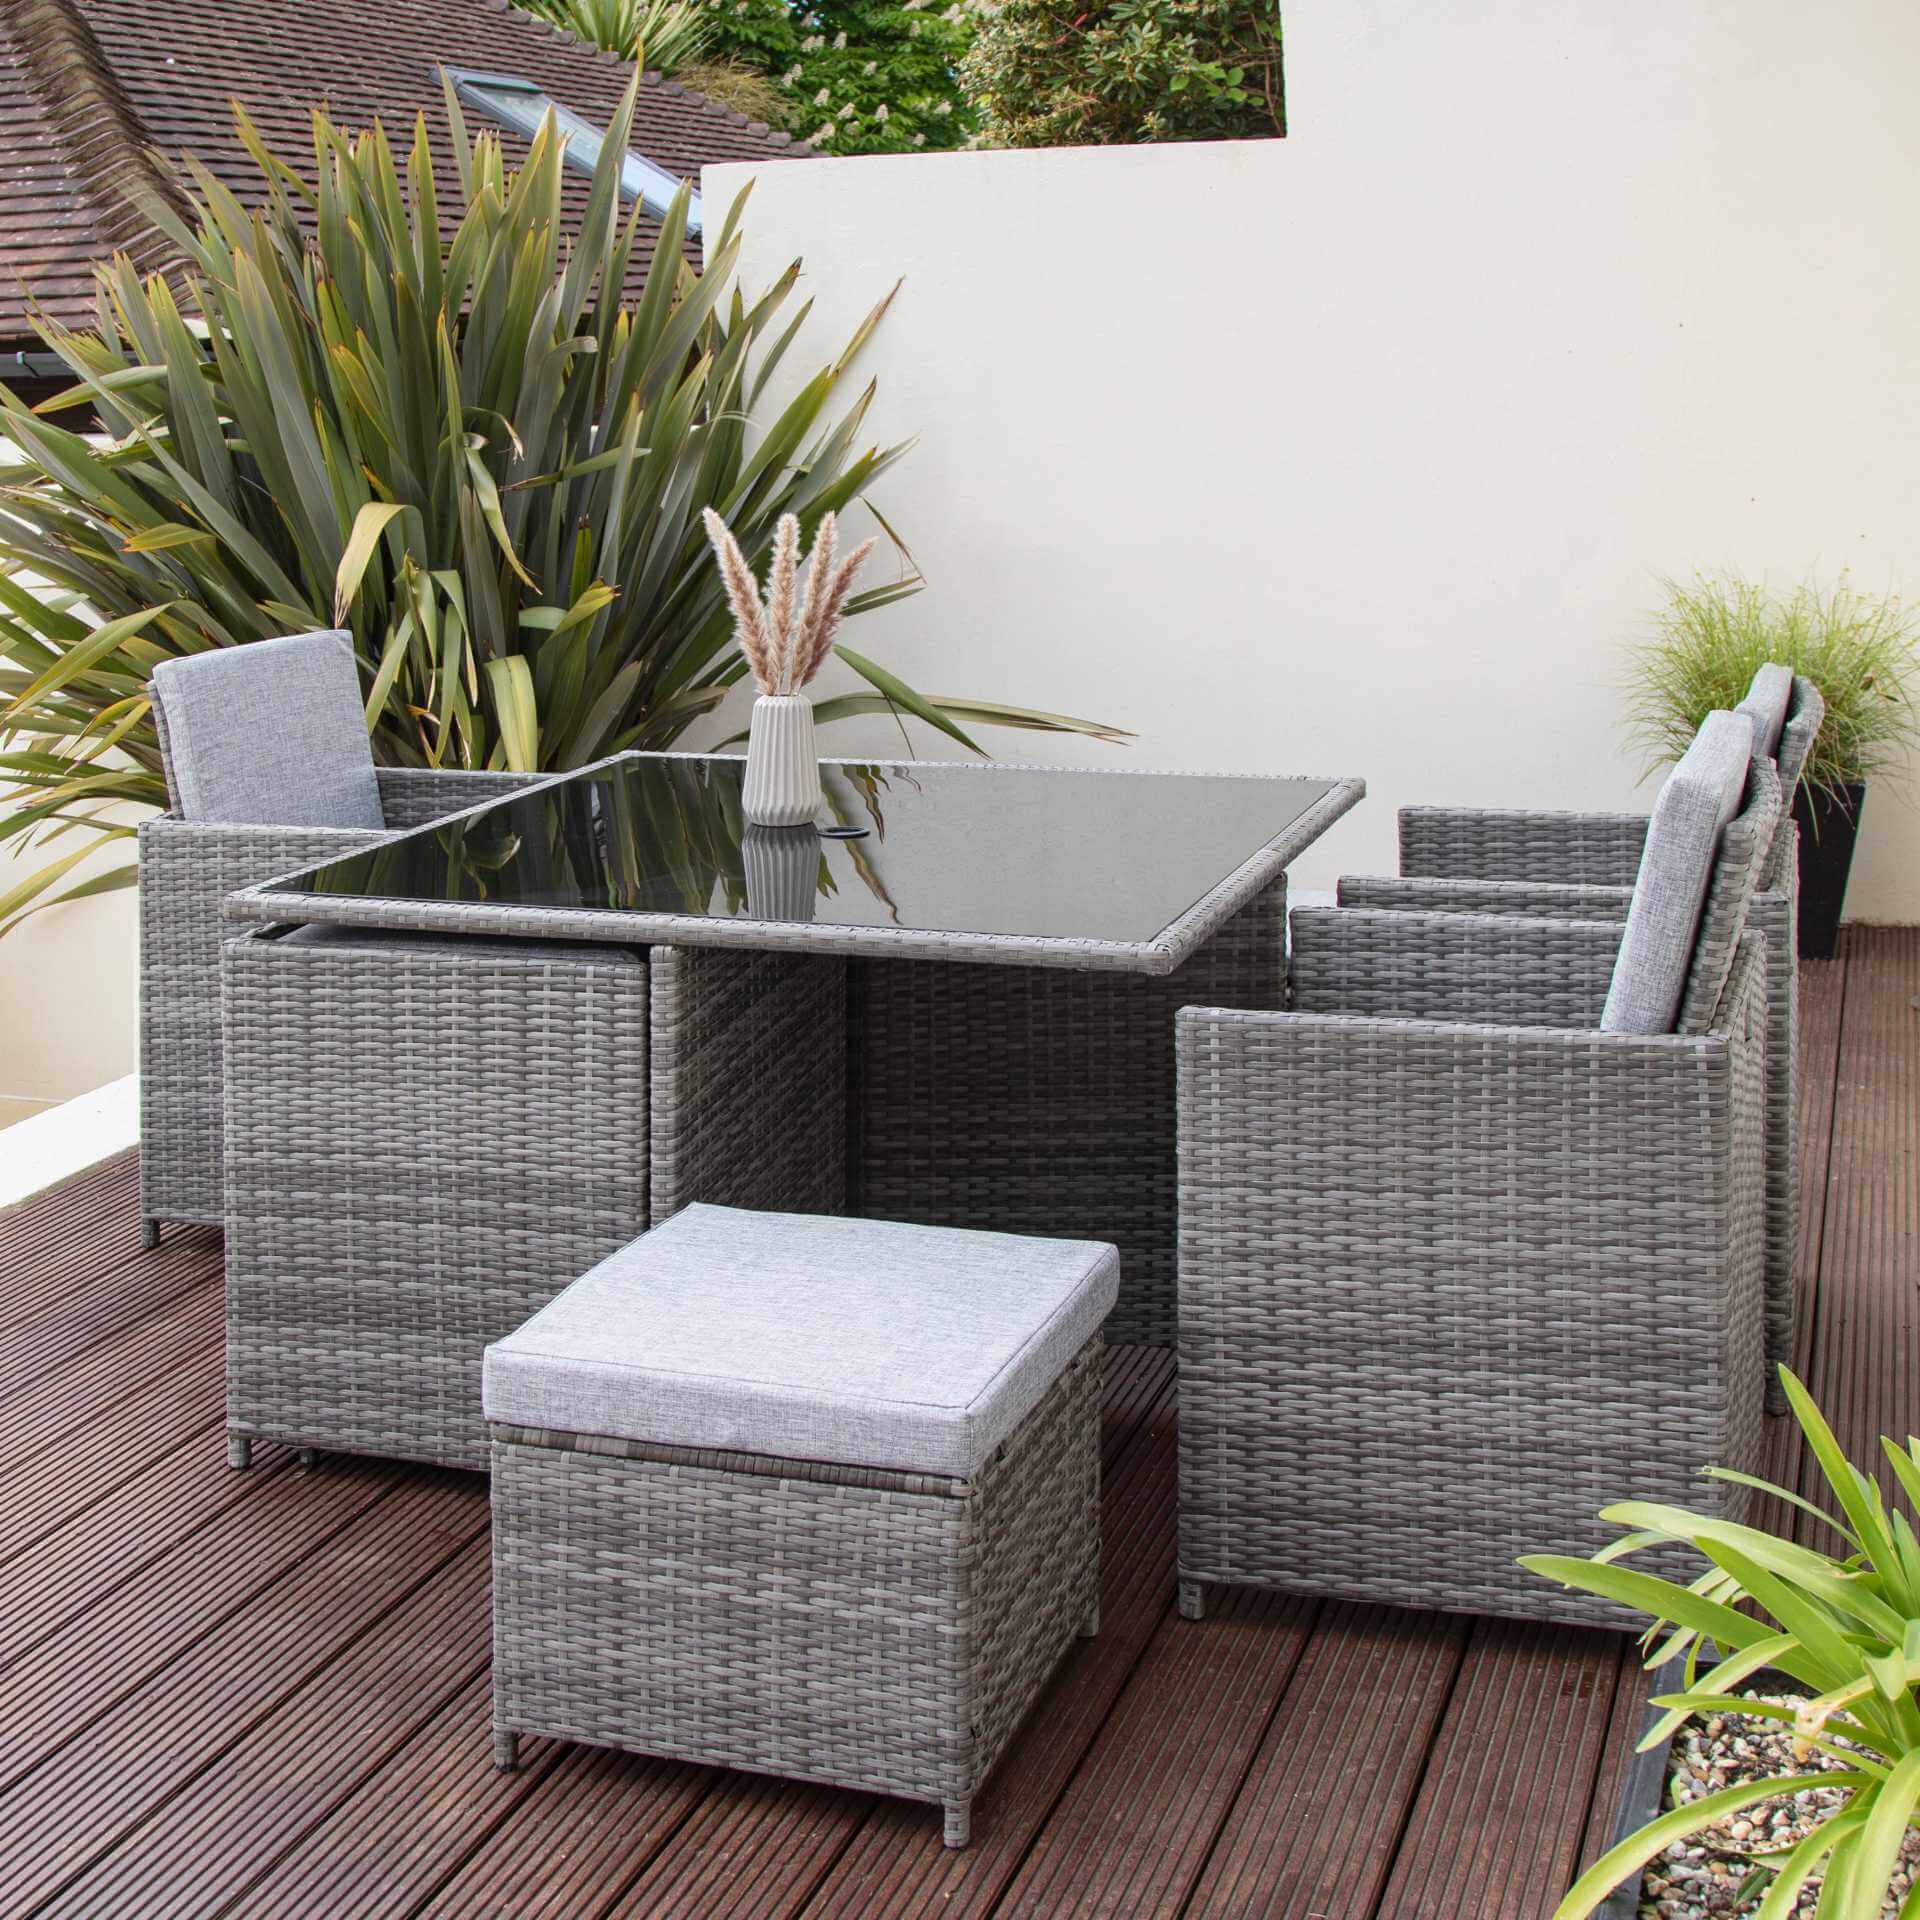 8 Seater Rattan Cube Outdoor Dining Set with Parasol - Grey Weave